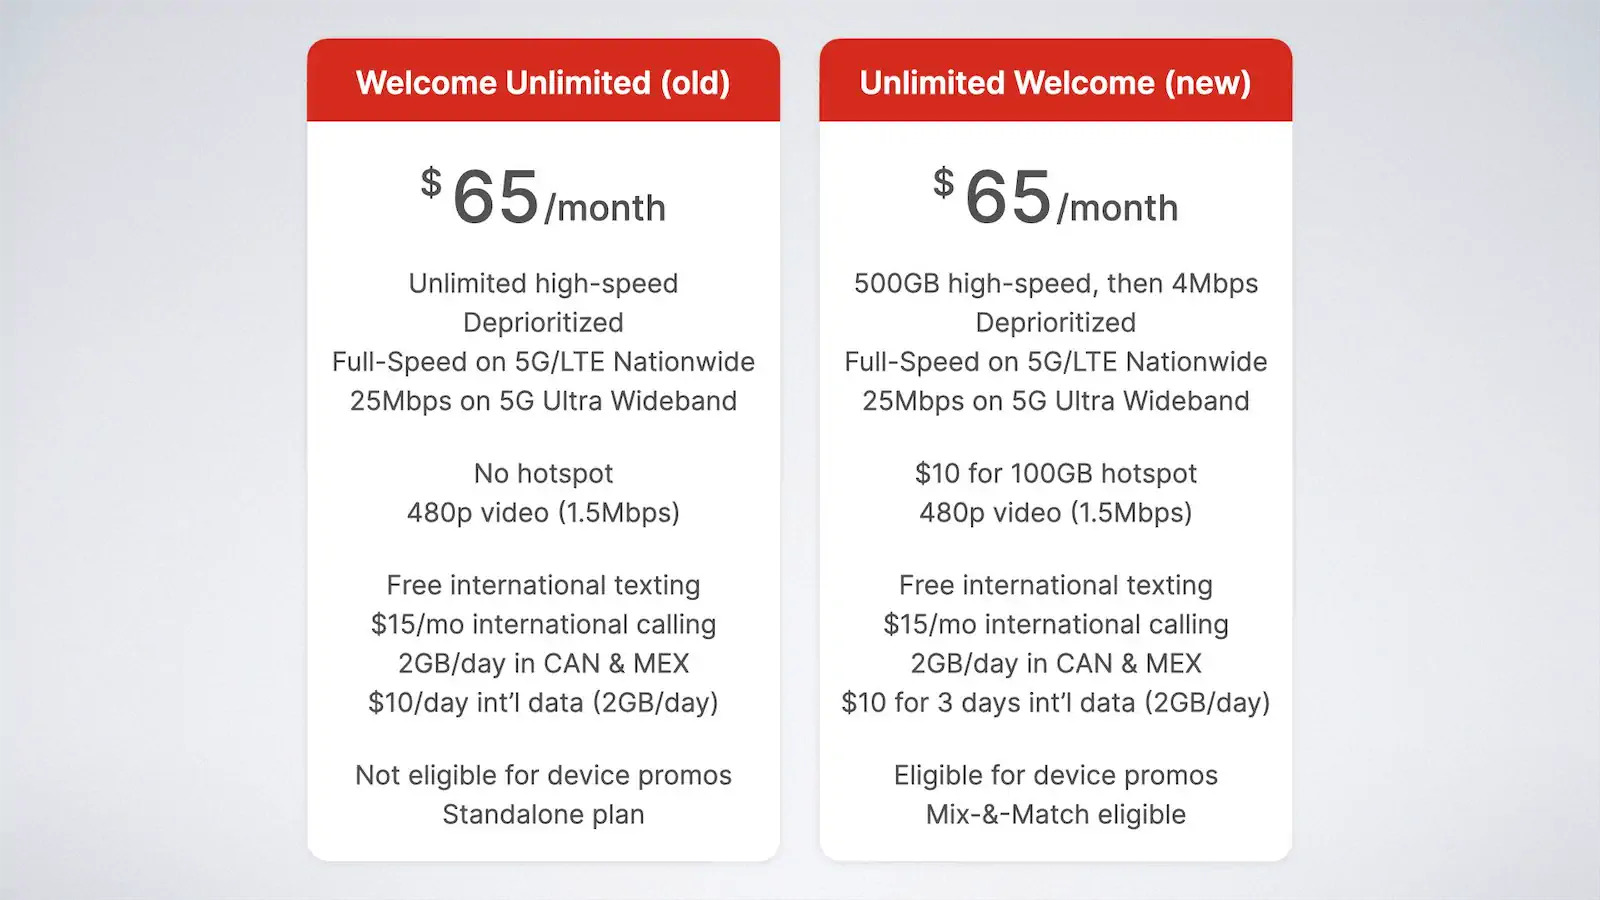 verizons-new-welcome-unlimited-plan-makes-5g-more-affordable